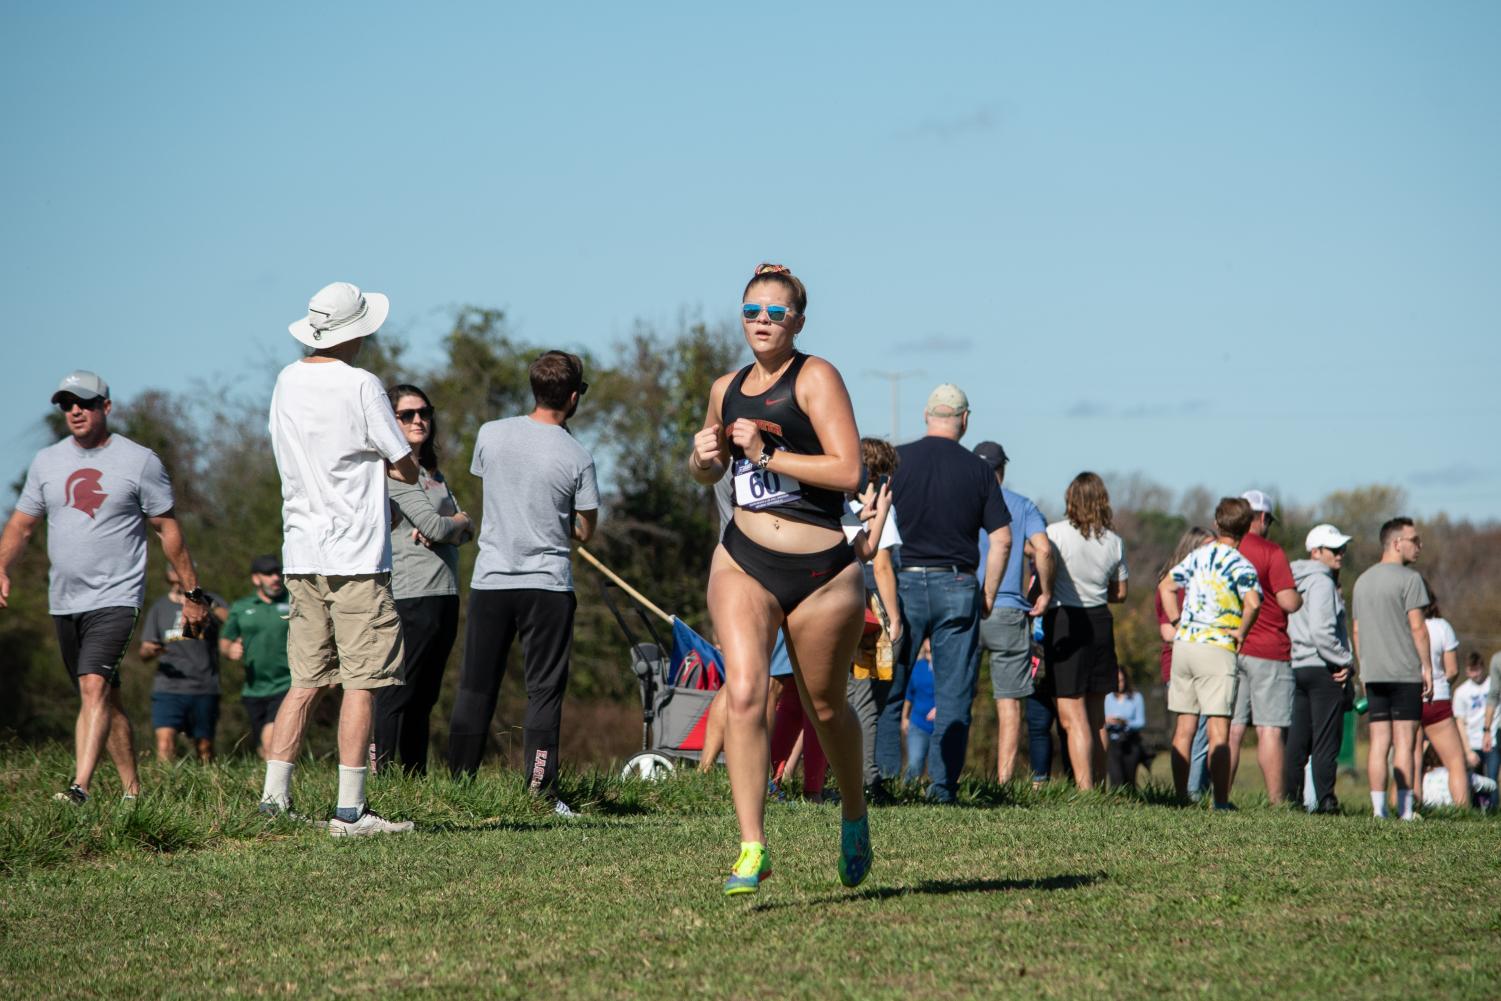 Bridgewater+Women%E2%80%99s+Cross+Country+Team+Places+11th+at+Regionals